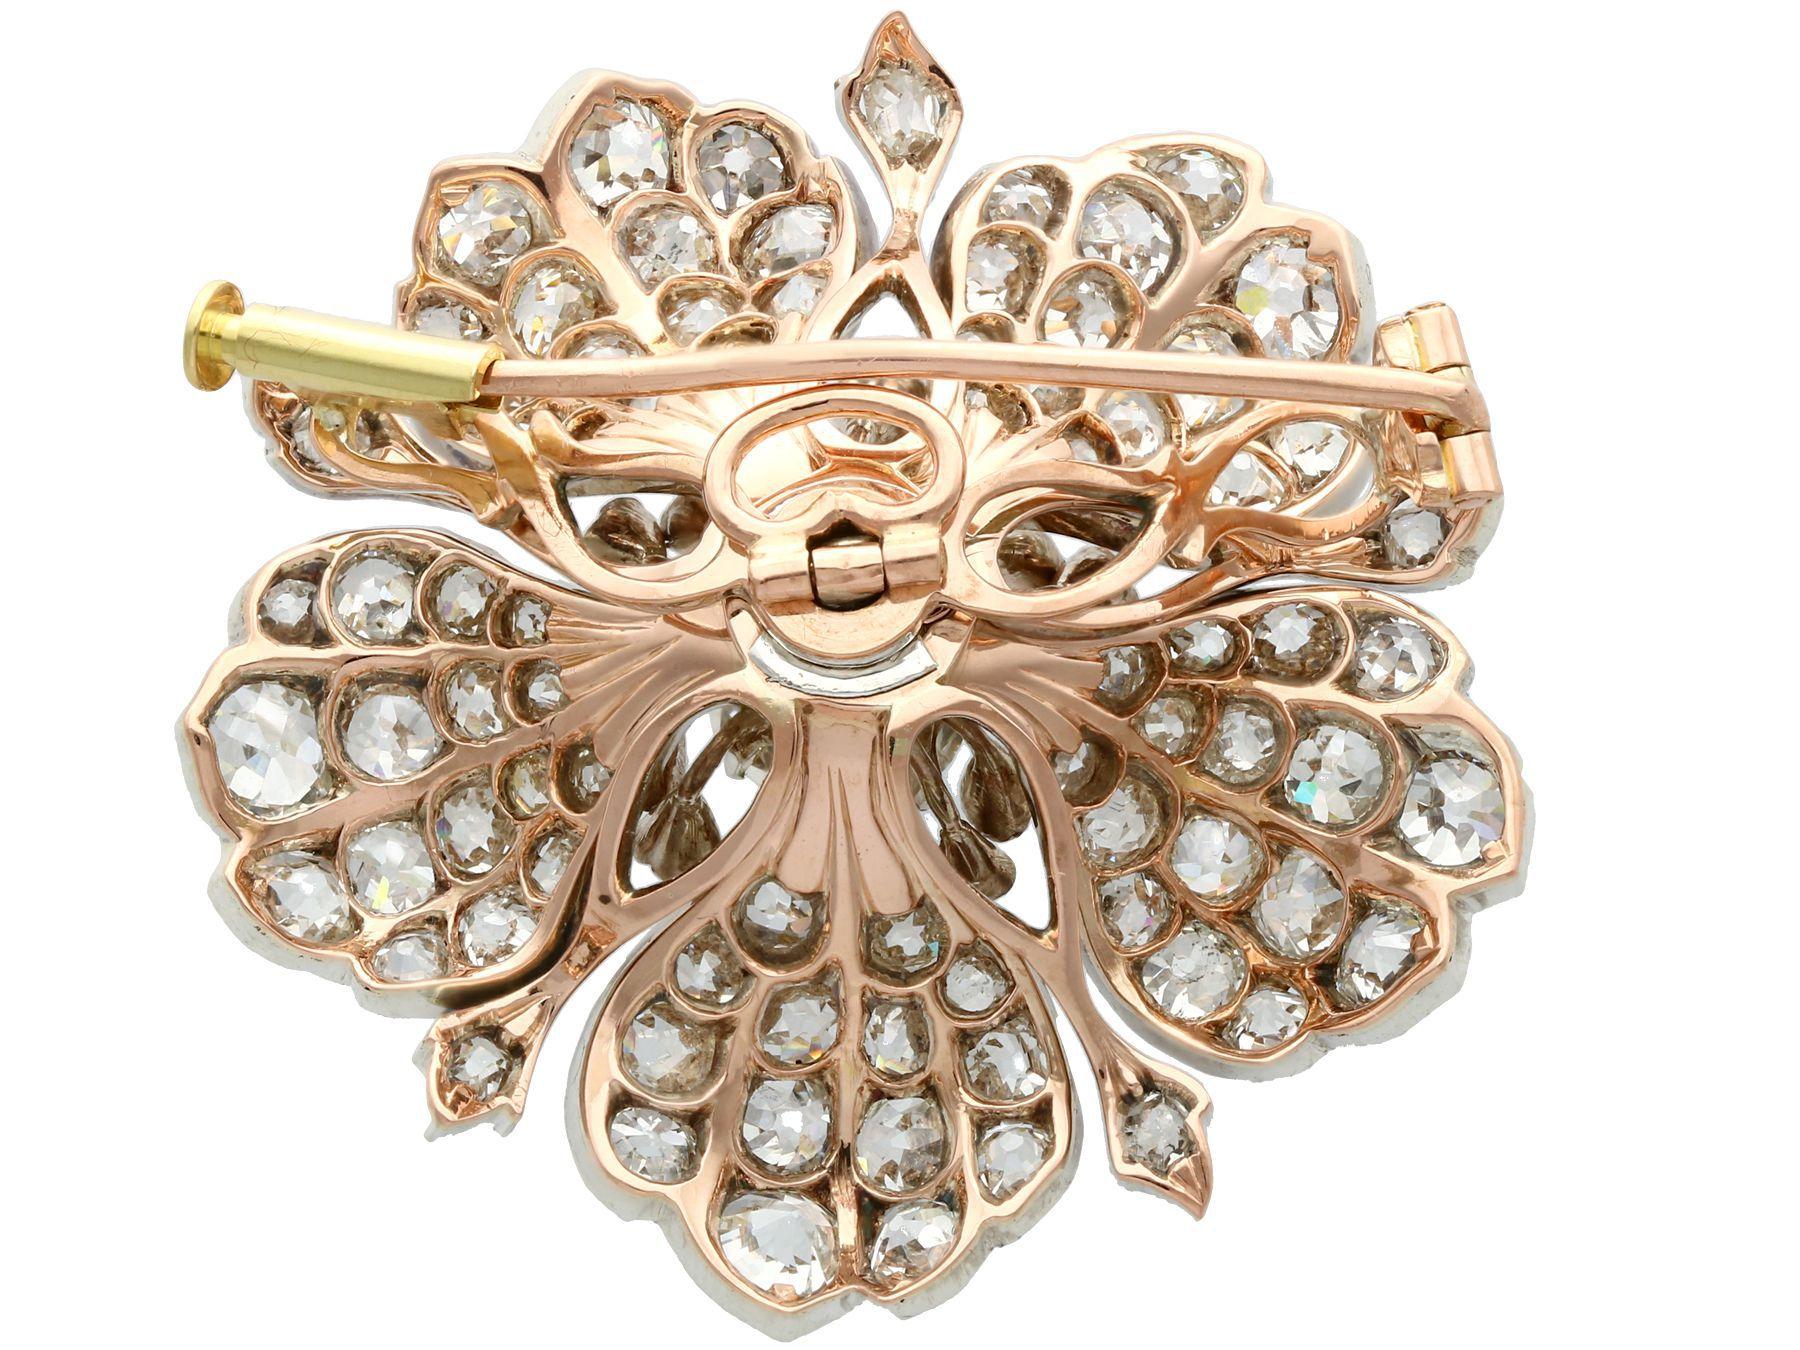 1890s Antique 11.97 Carat Diamond and White Gold Floral Brooch 2